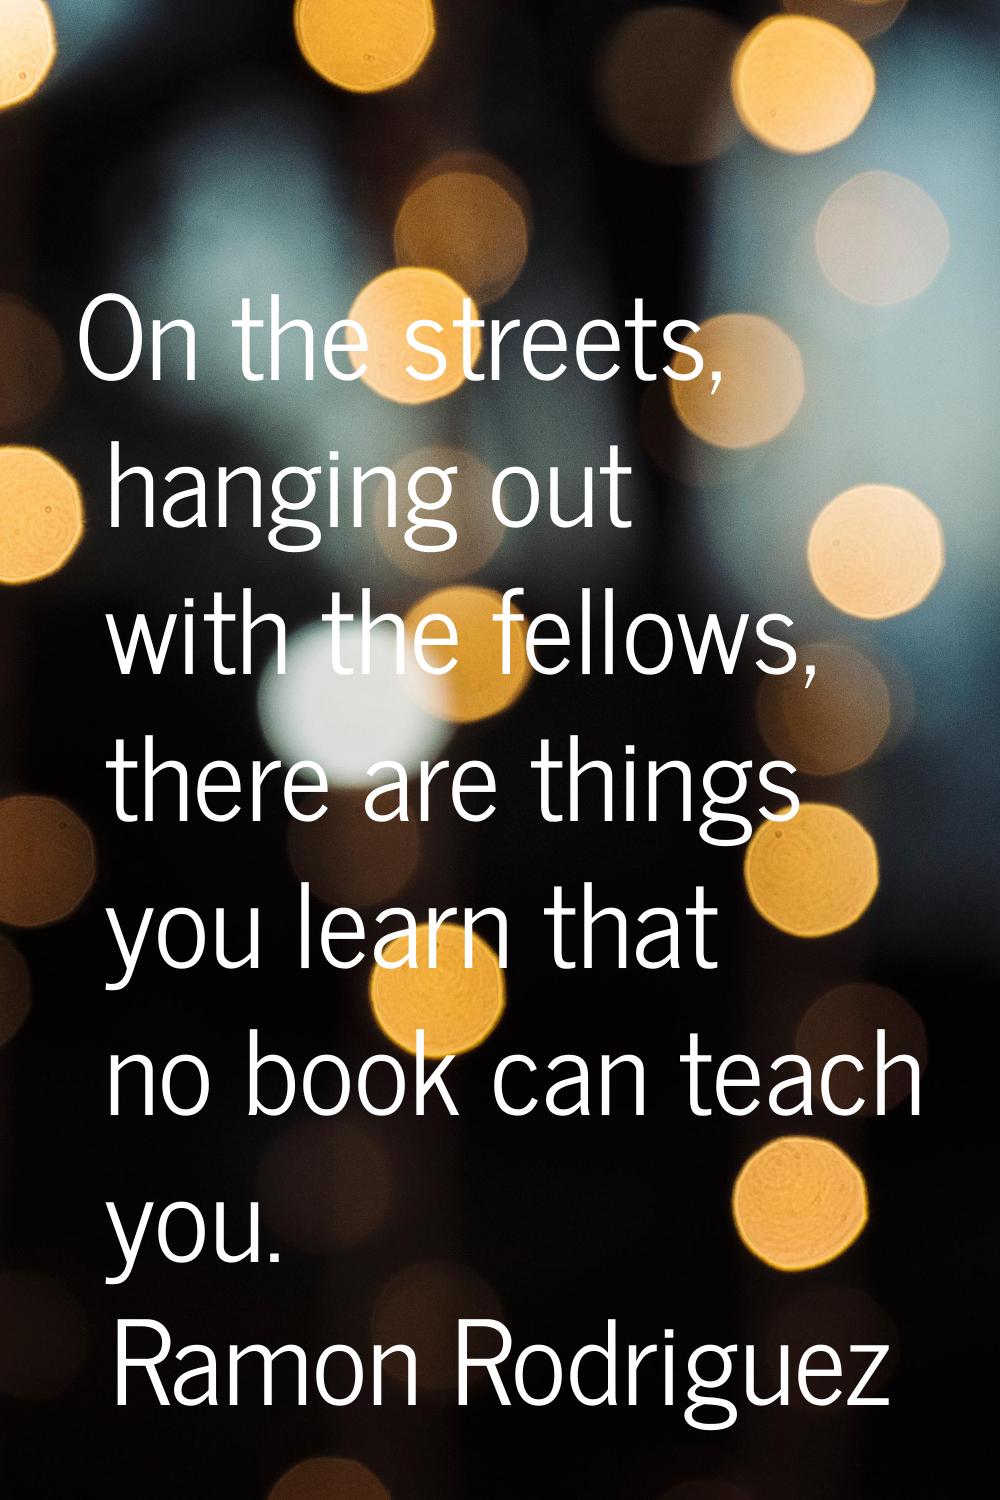 On the streets, hanging out with the fellows, there are things you learn that no book can teach you